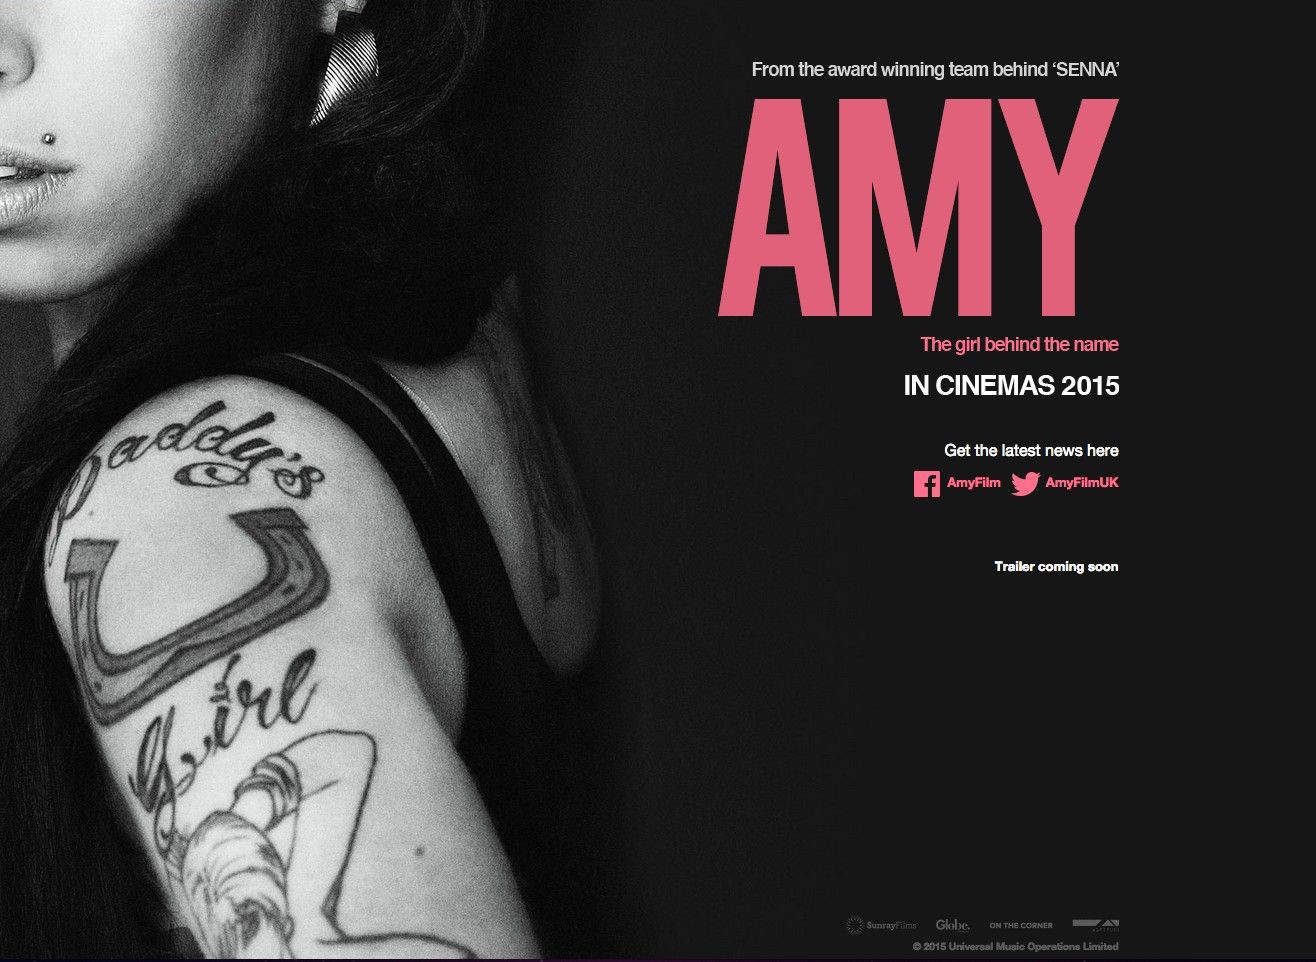 ‘Amy’ Documentary Review